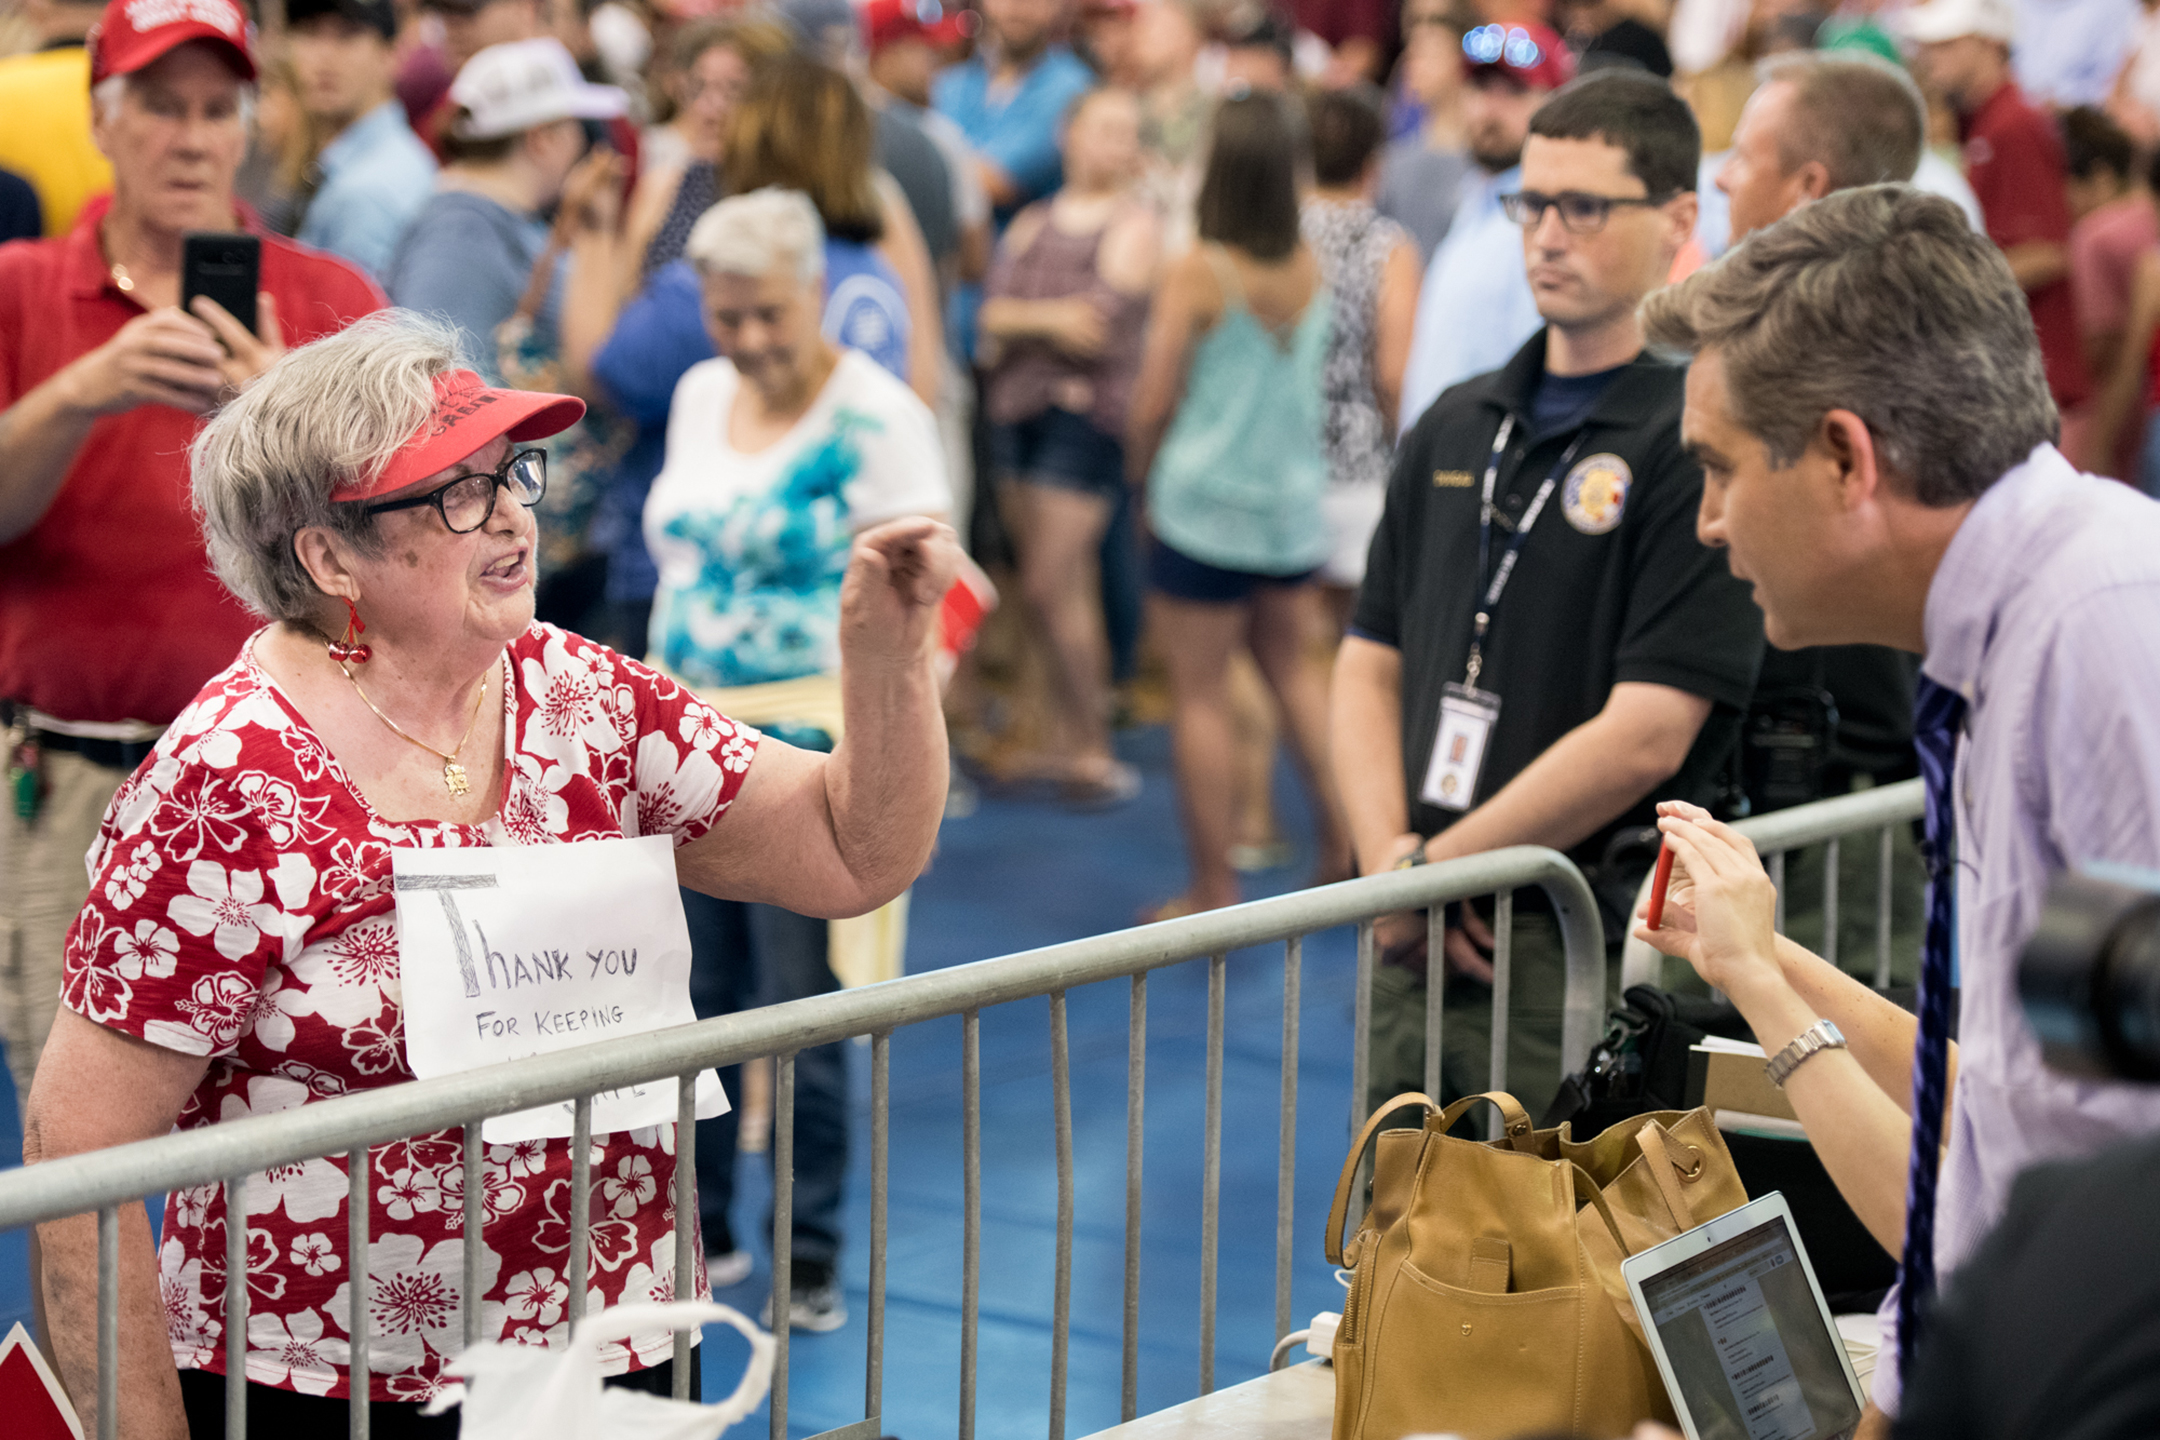 An elderly woman in a make America great again hat shouts and points at Jim Acosta, who is standing behind a metal barricade